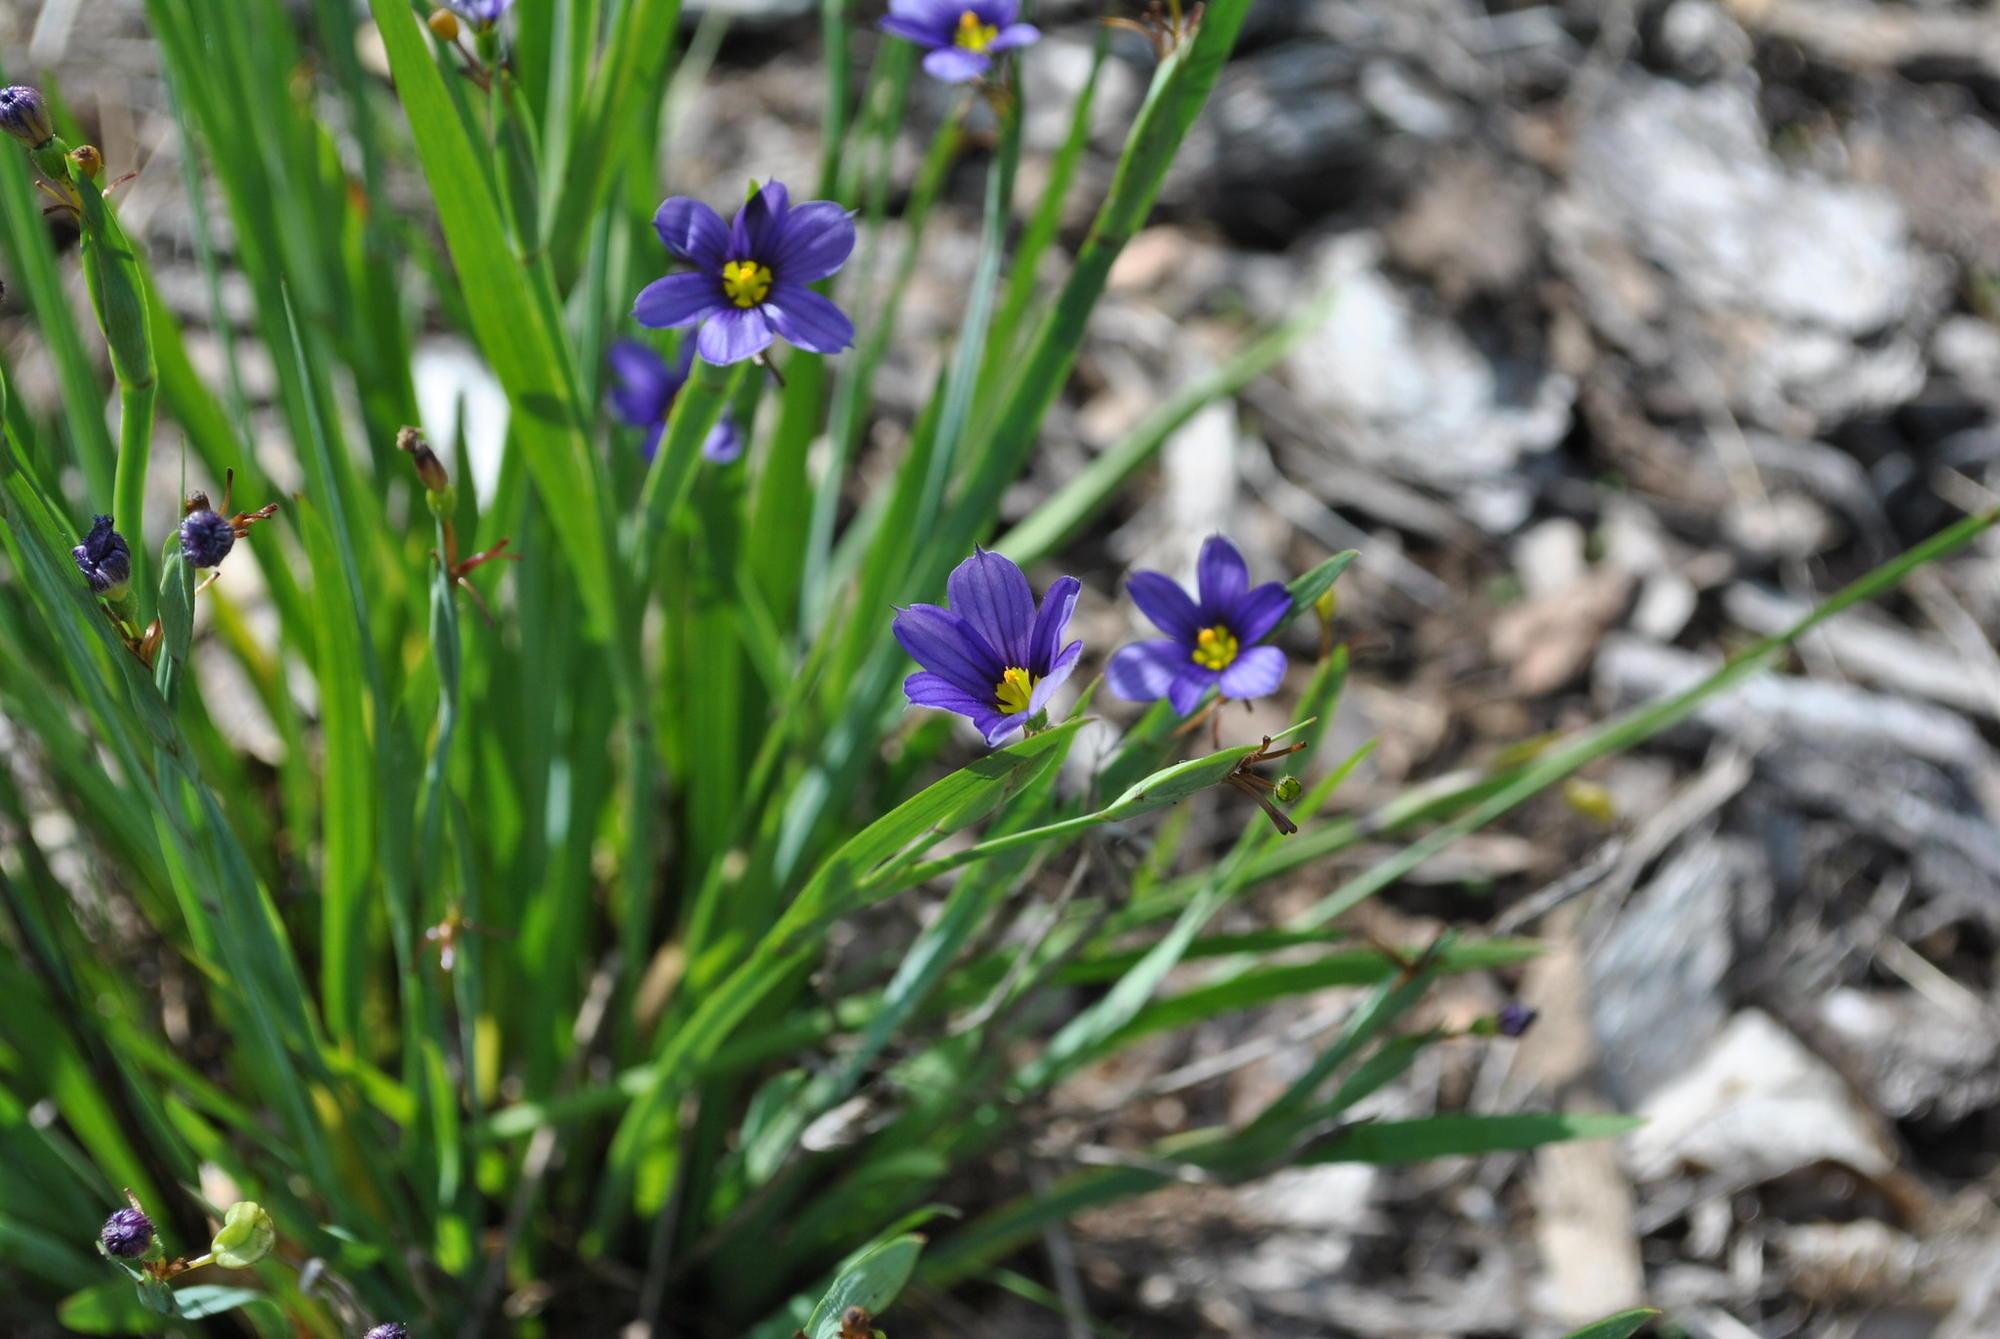 bright blue/purple flowers with yellow centers on grass-like stalks